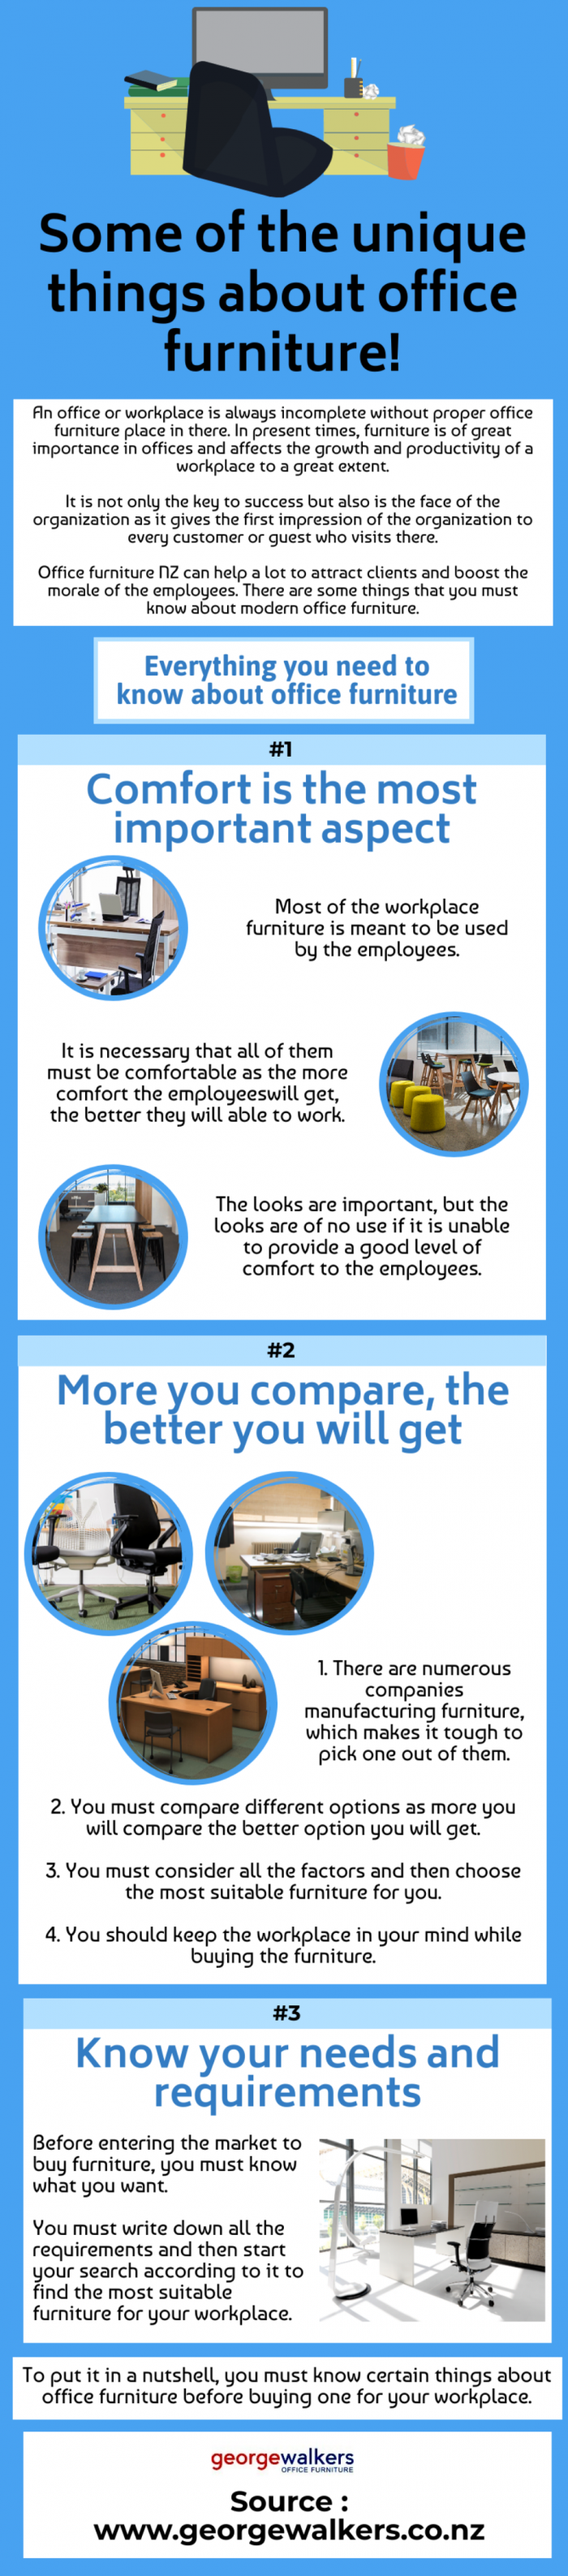 Unique things about office furniture